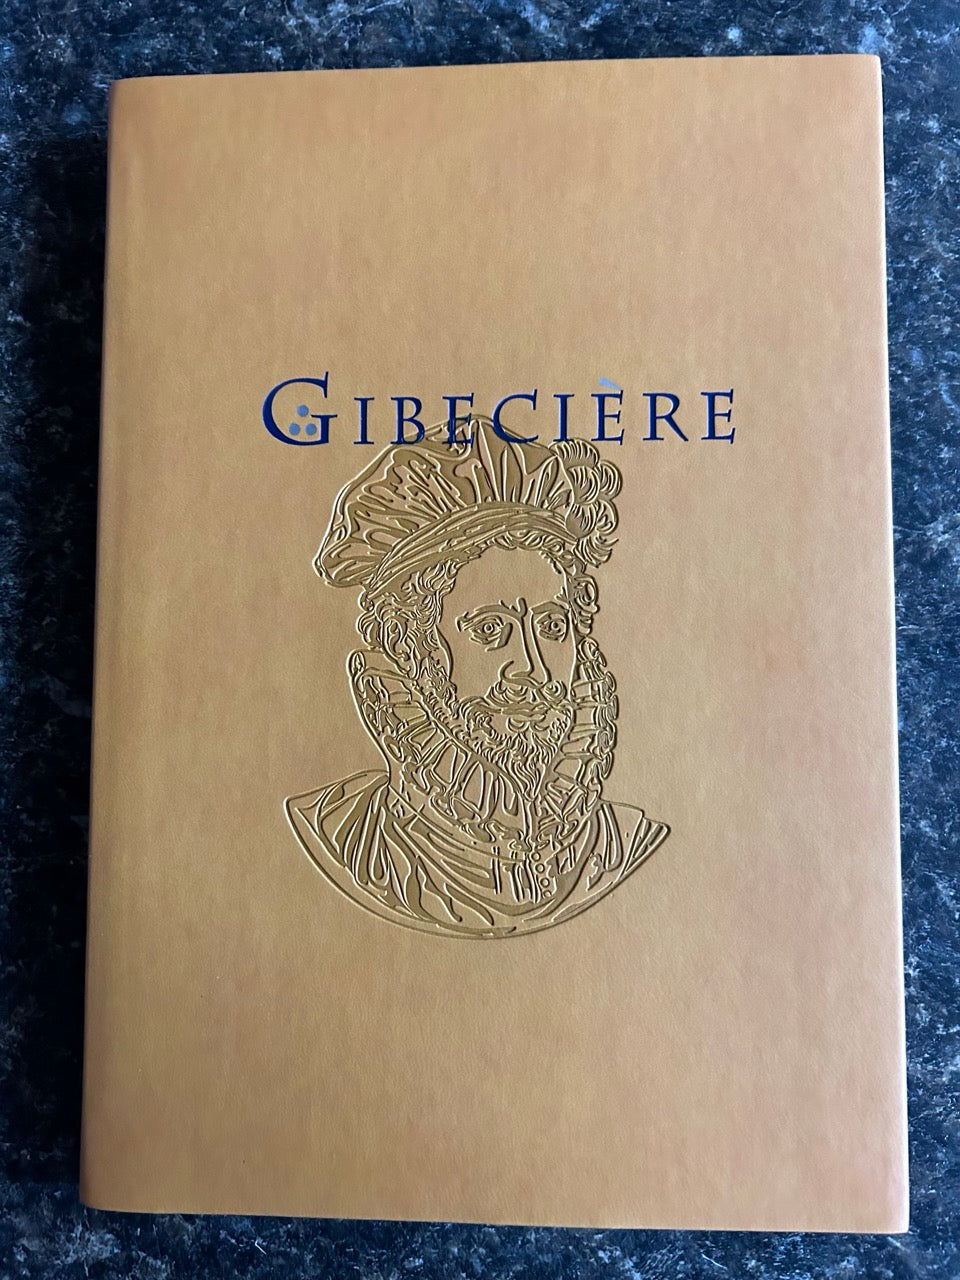 Gibeciere Lot (31 issues)